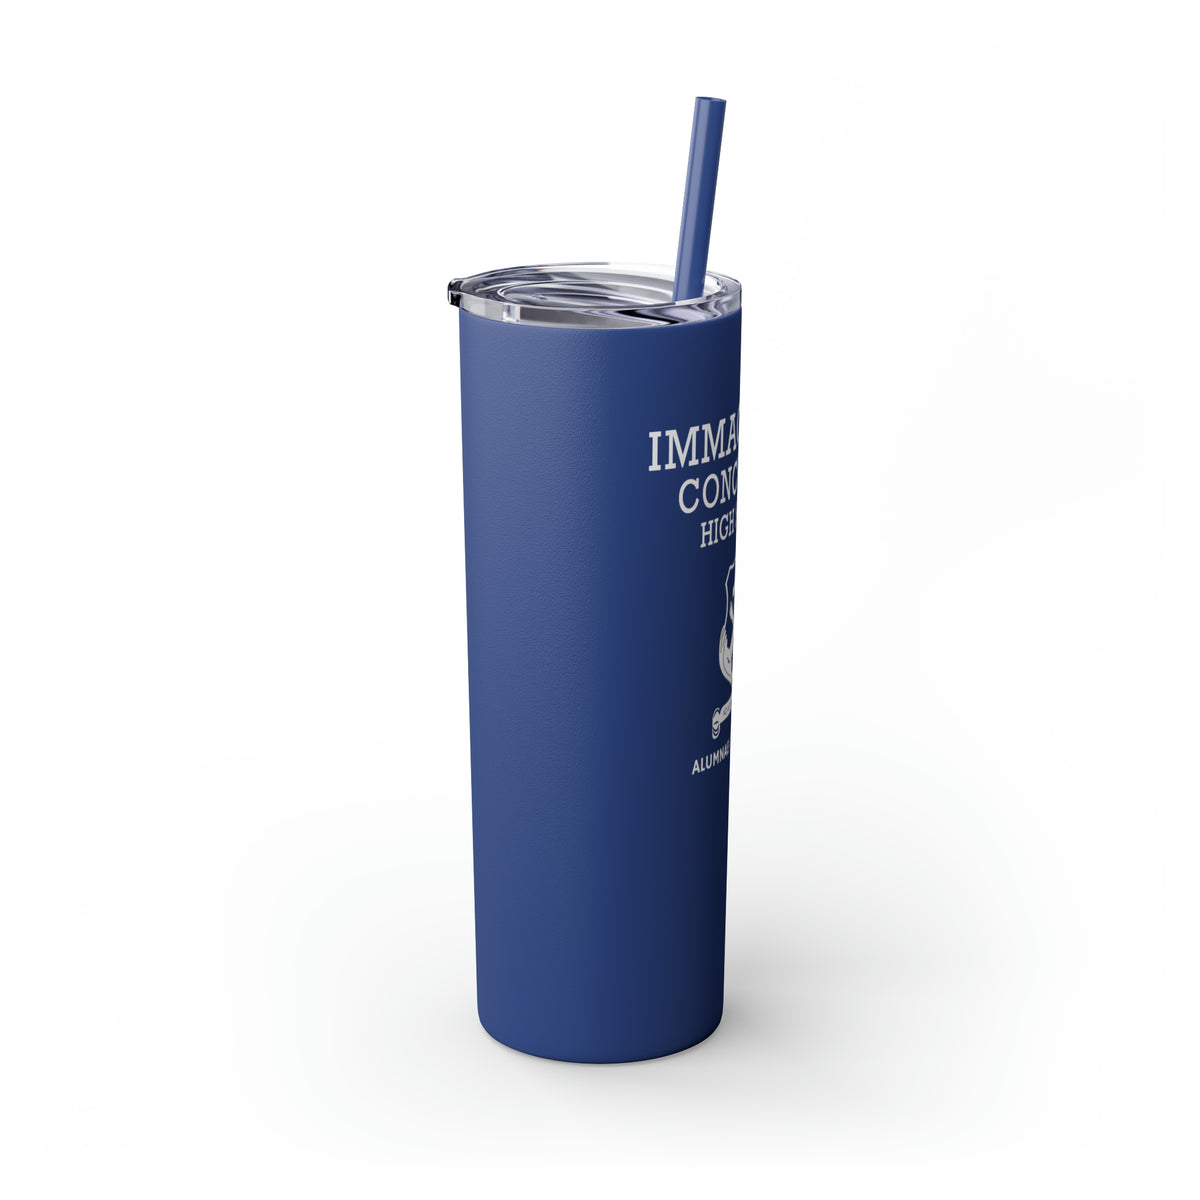 Immaculate Conception High School Alumnae Association Skinny Tumbler with Straw, 20oz